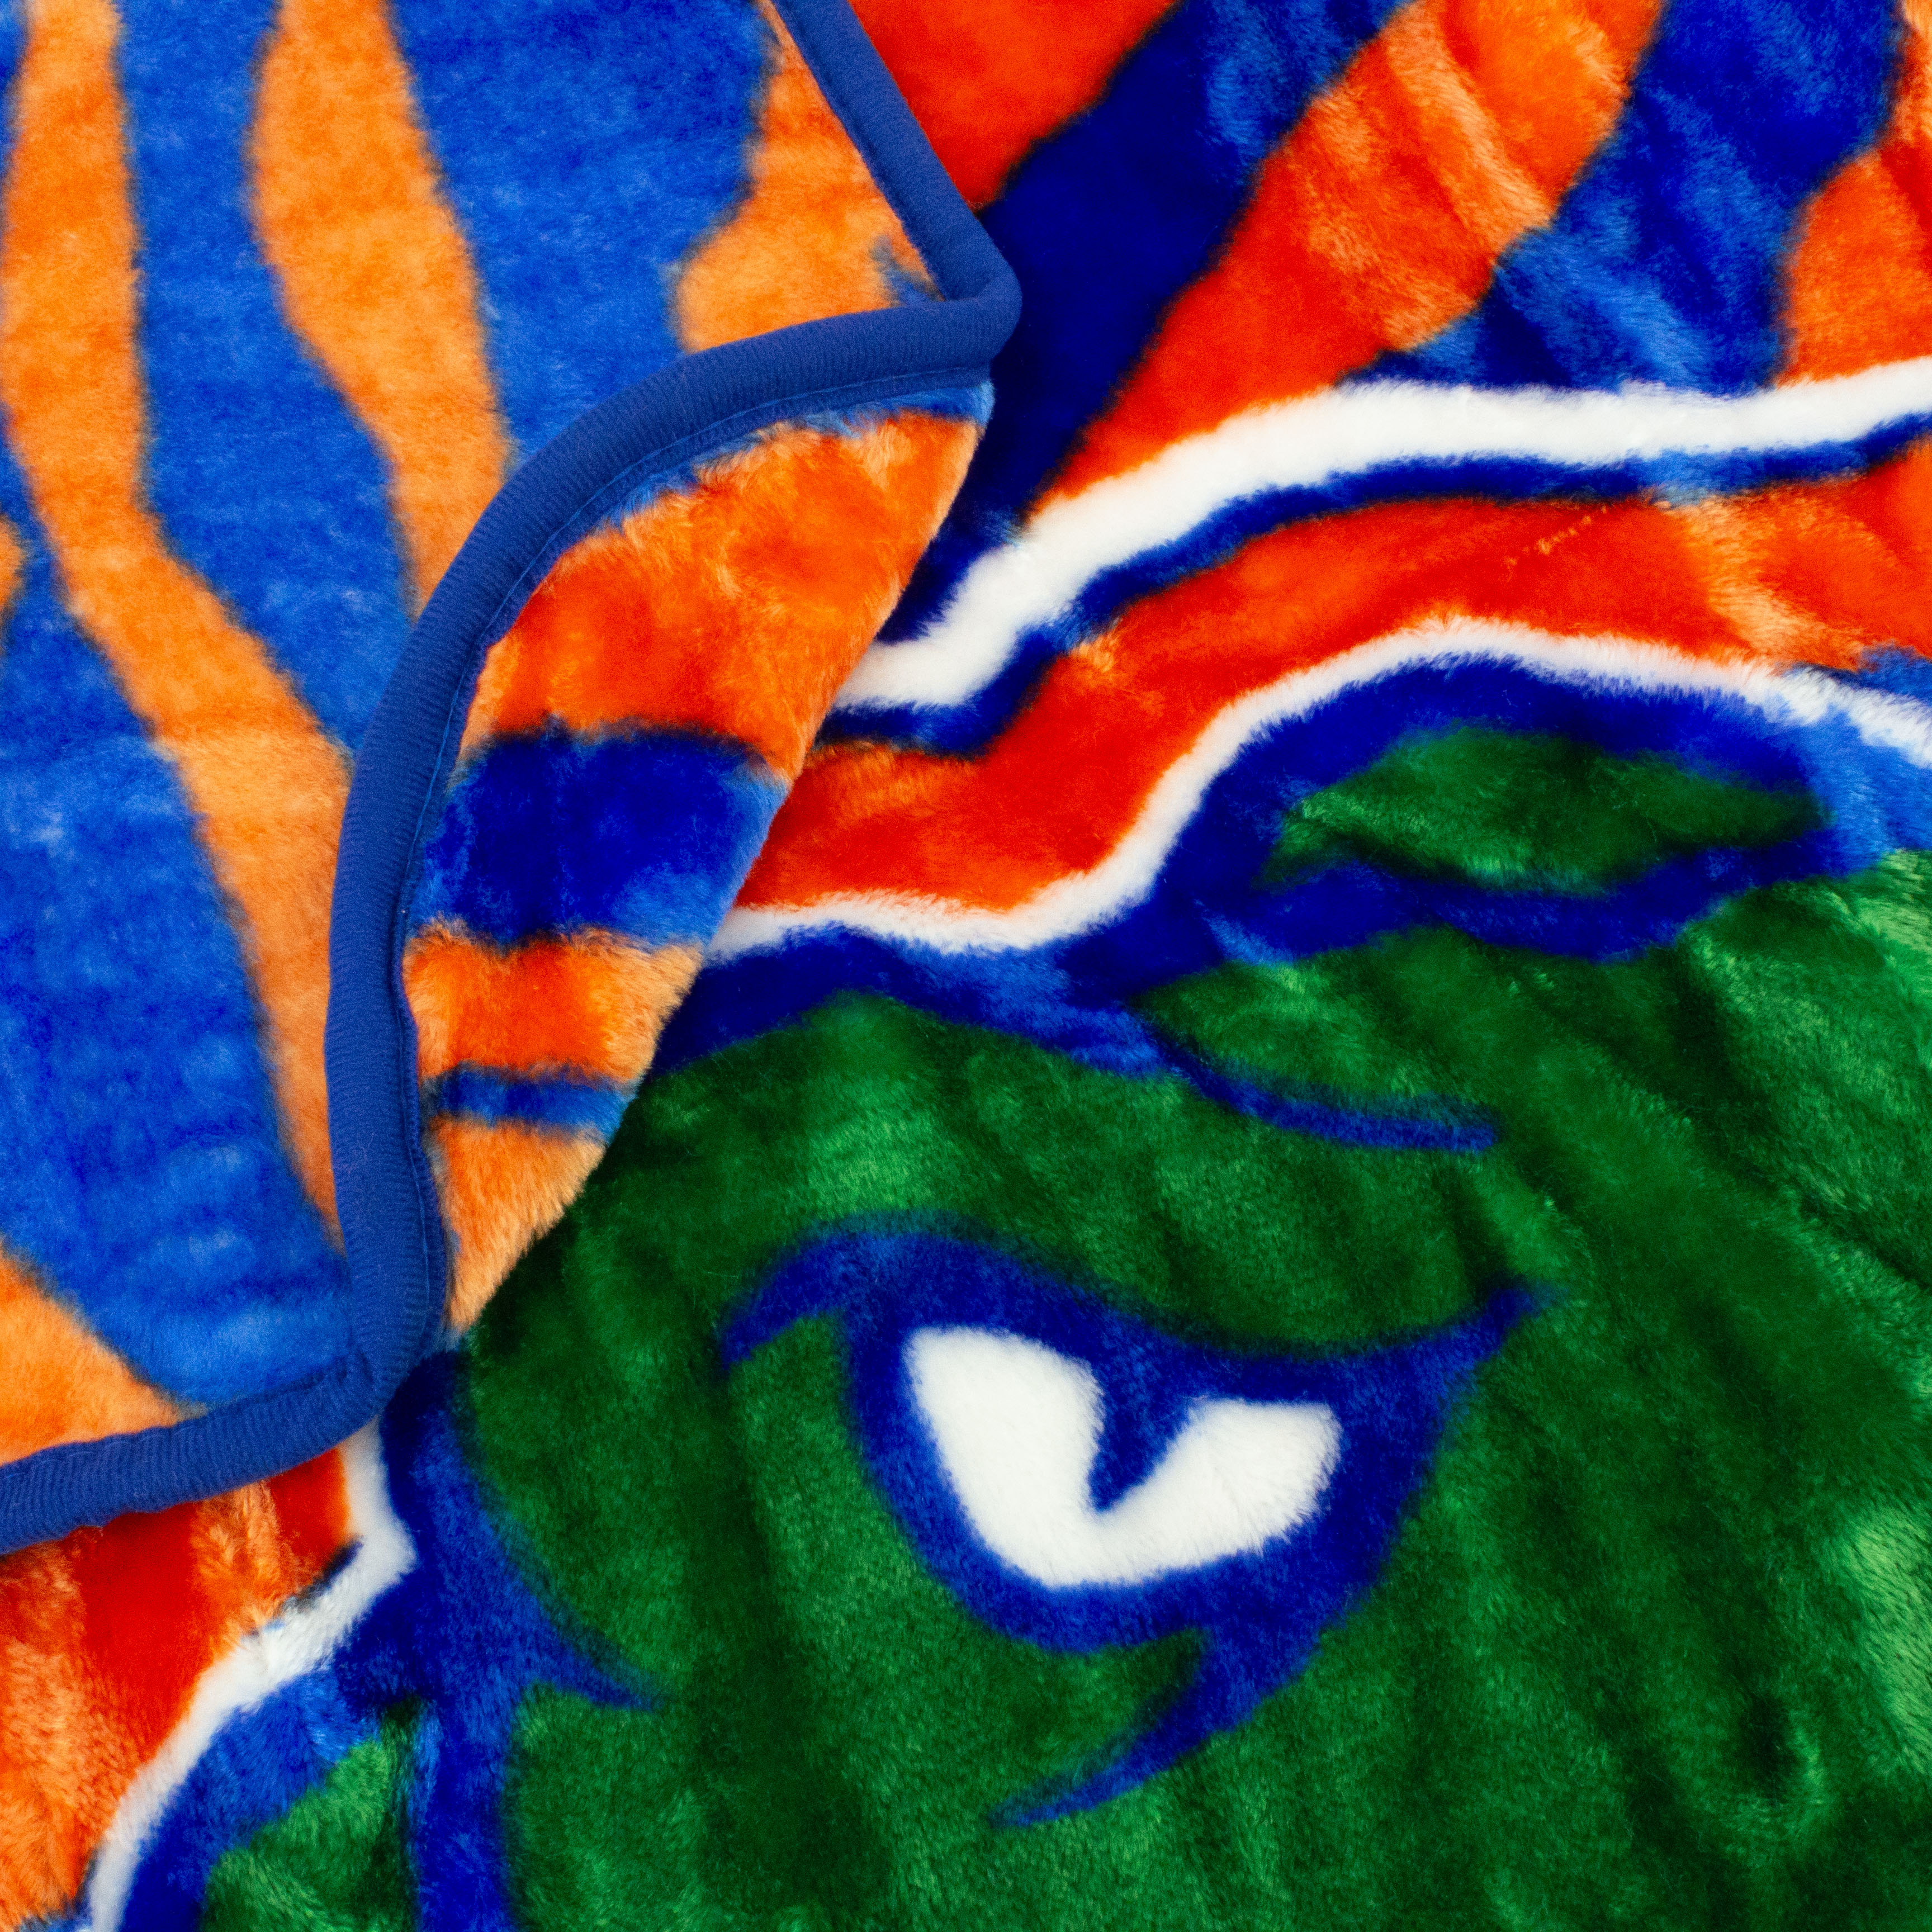 College Covers Everything Comfy Florida Gators Soft Raschel Throw Blanket, 60" x 50" - image 5 of 6